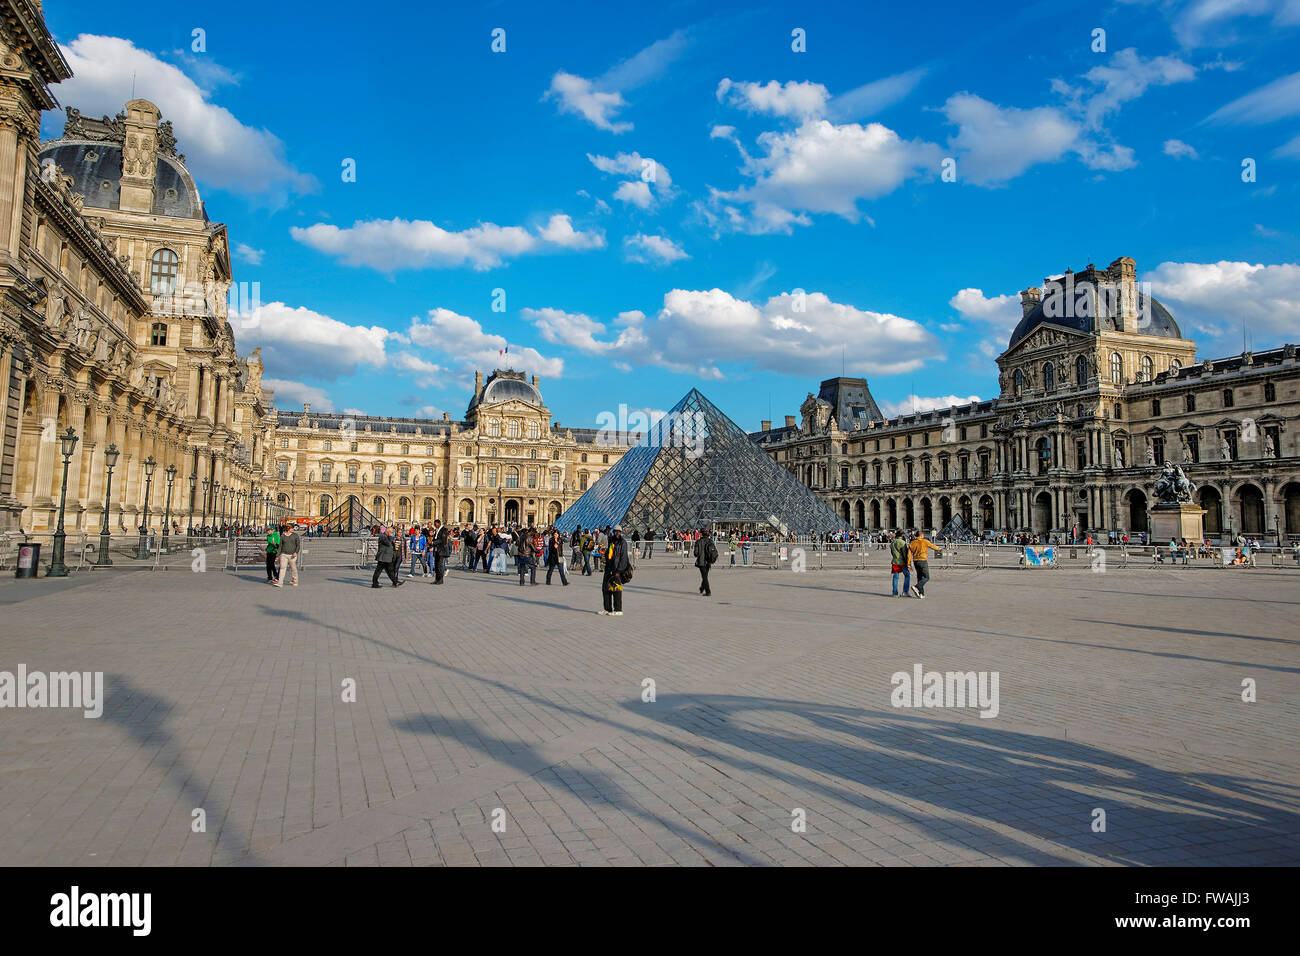 PARIS, FRANCE - MAY 3, 2012: Louvre Pyramid and Louvre Palace in Paris in France.  Palace of Louvre is a former royal palace and now is a museum. Louvre Pyramid is a large metal and glass pyramid Stock Photo